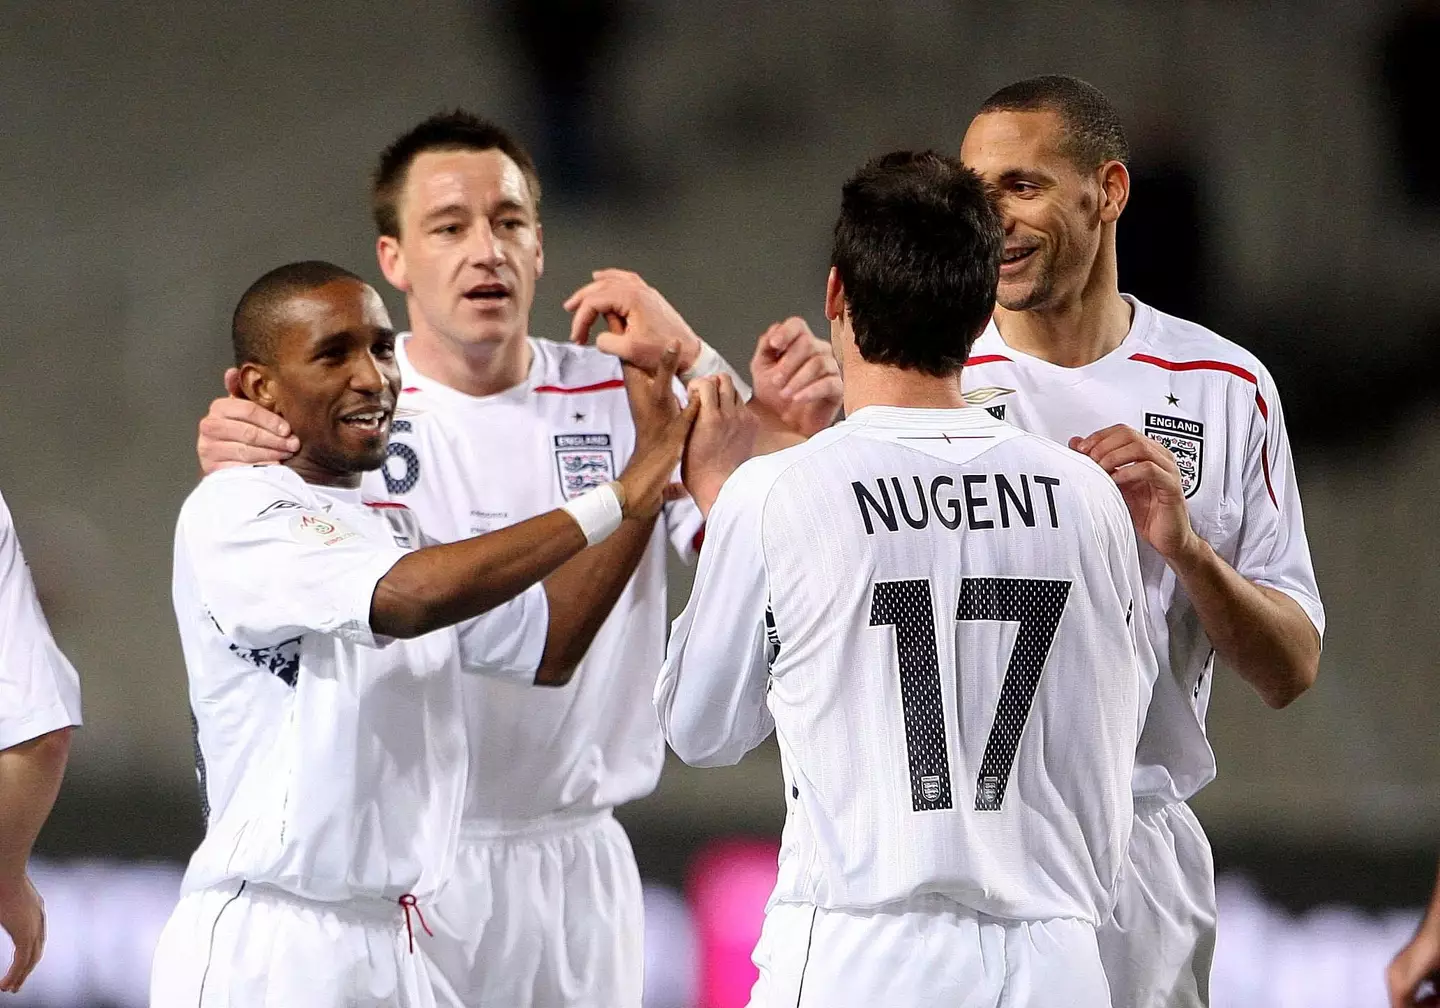 Jermain Defoe initially didn't look fussed with David Nugent stealing his goal in the game. (